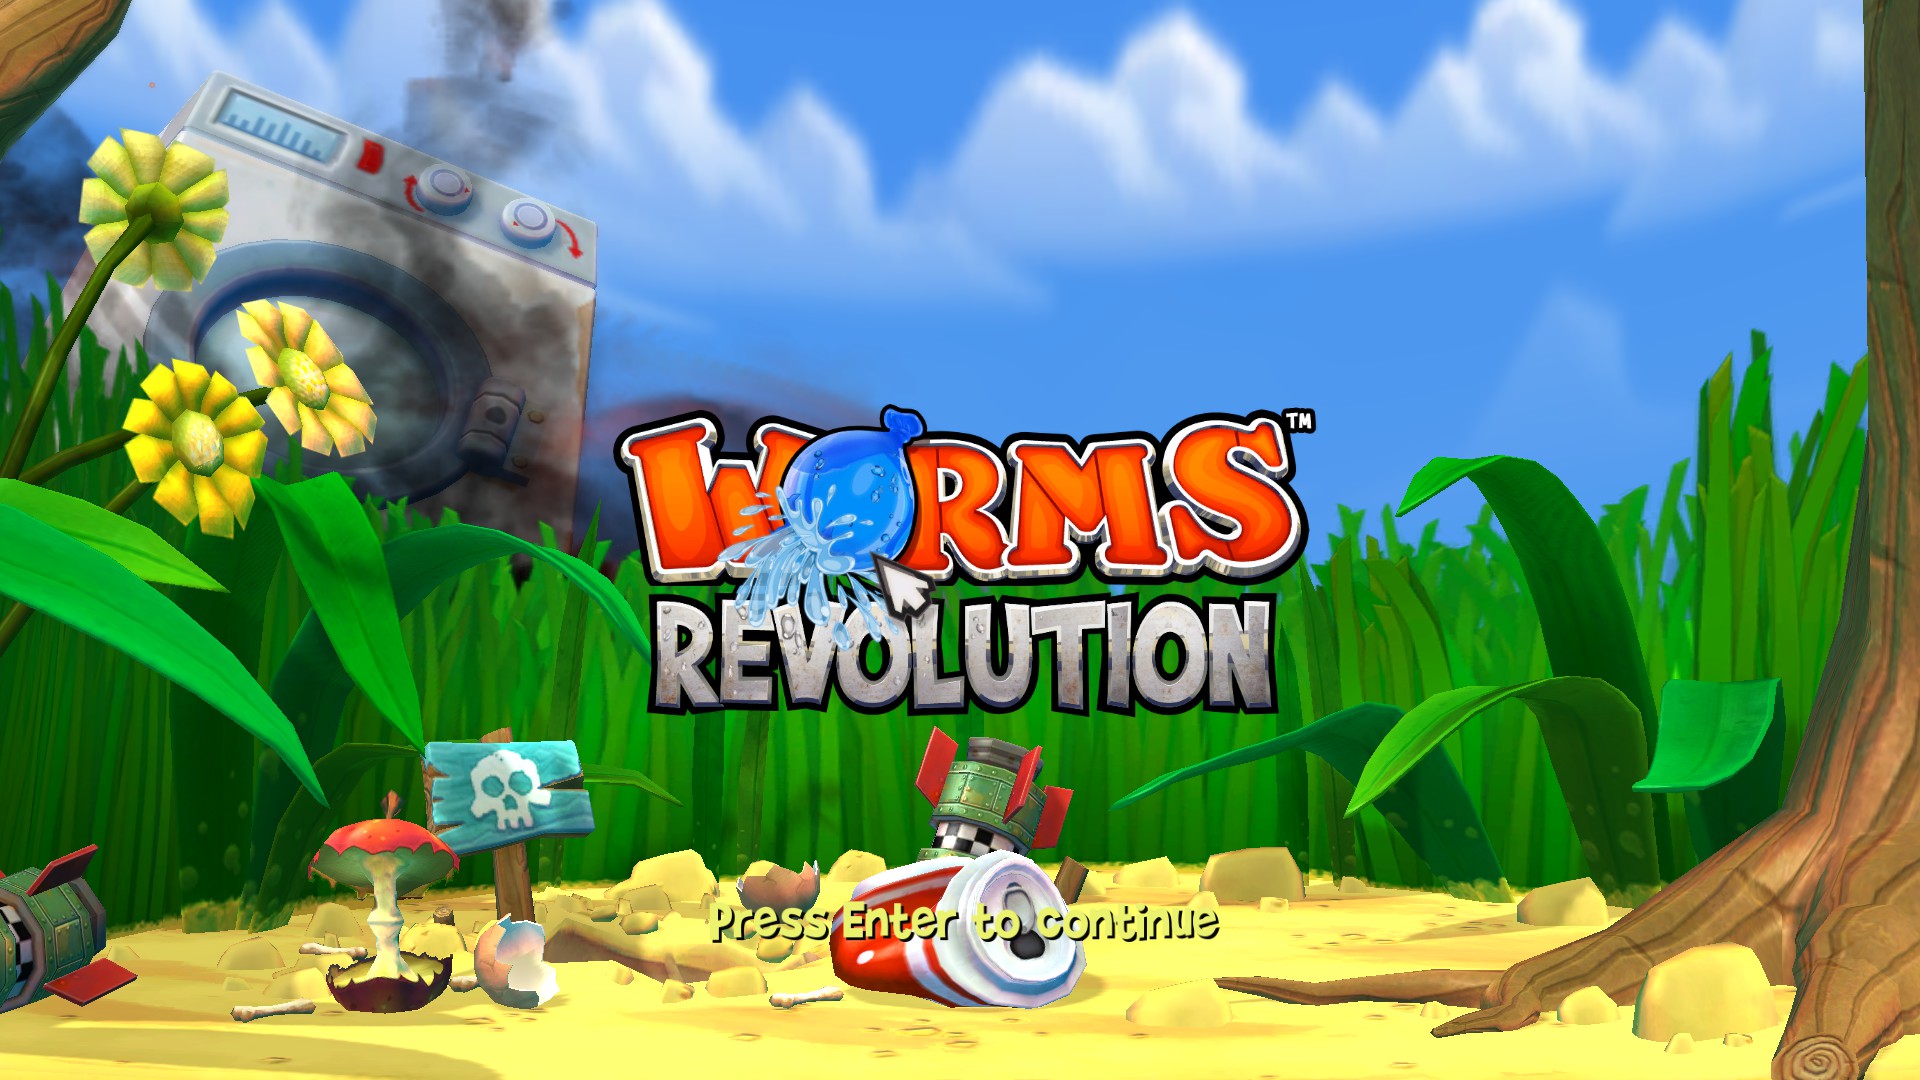 worms the revolution collection download free